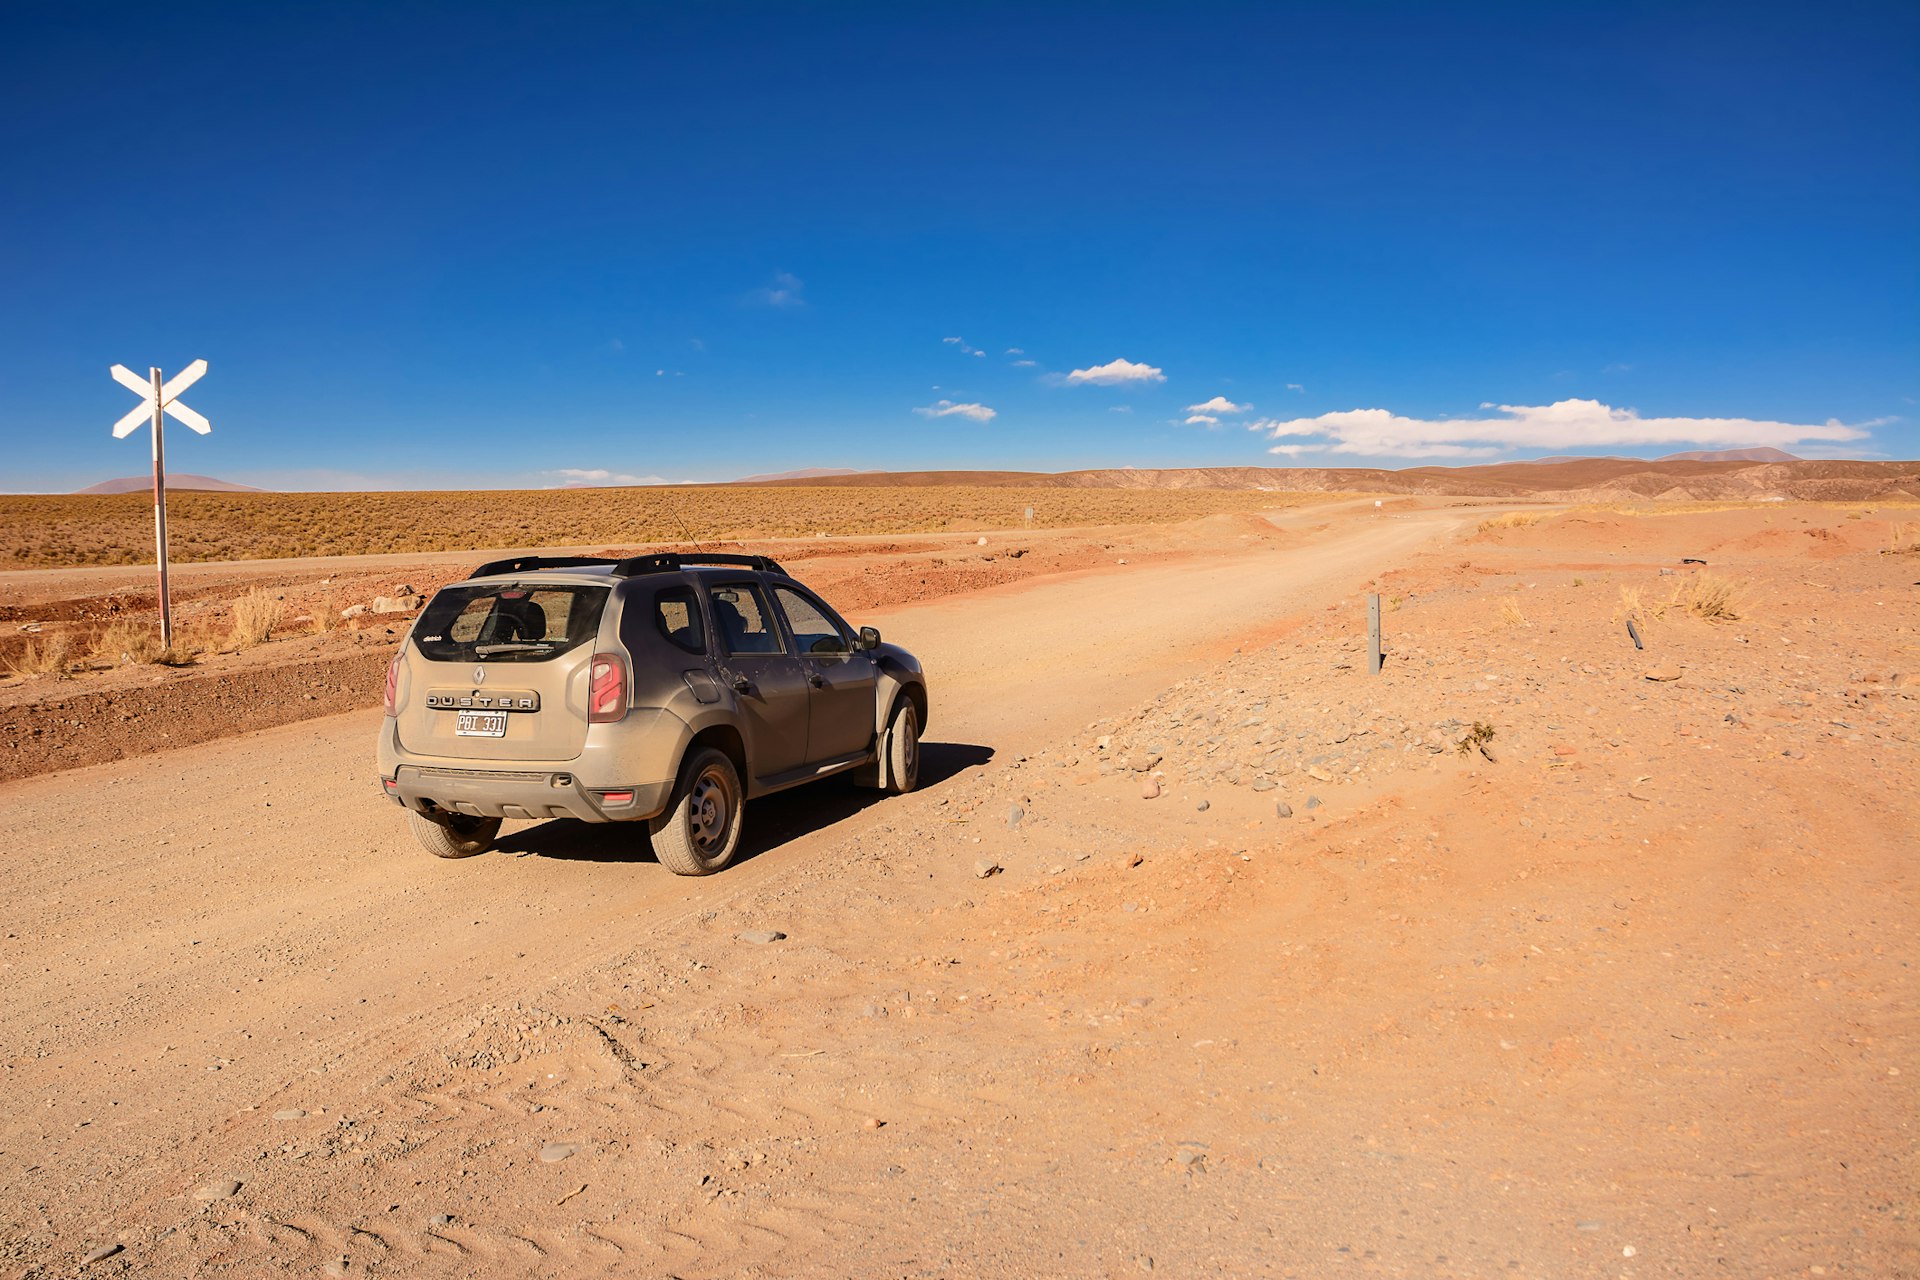 A dusty car sits on an unpaved highway surrounded by the red sands of a desert landscape